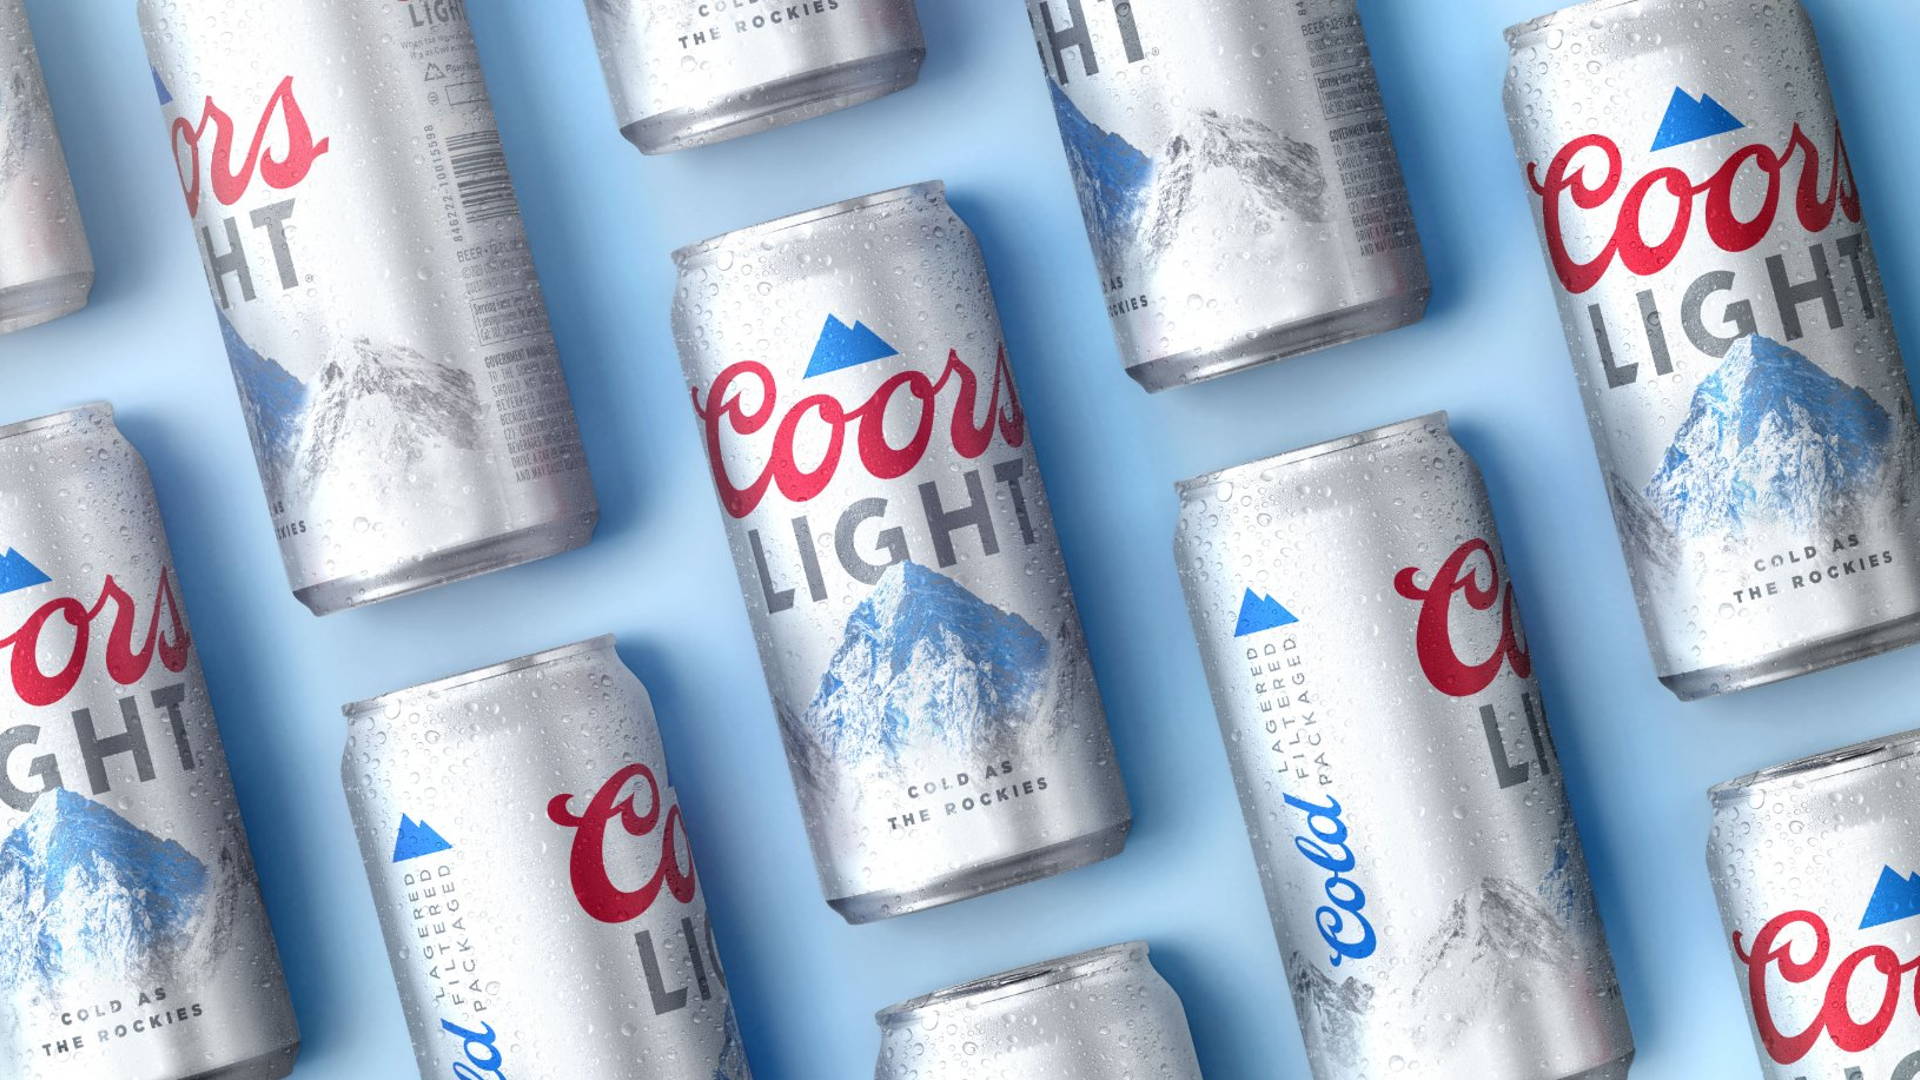 Soulsight Gives Coors Light A More Contemporary, Natural Touch. Dieline, Branding & Packaging Inspiration